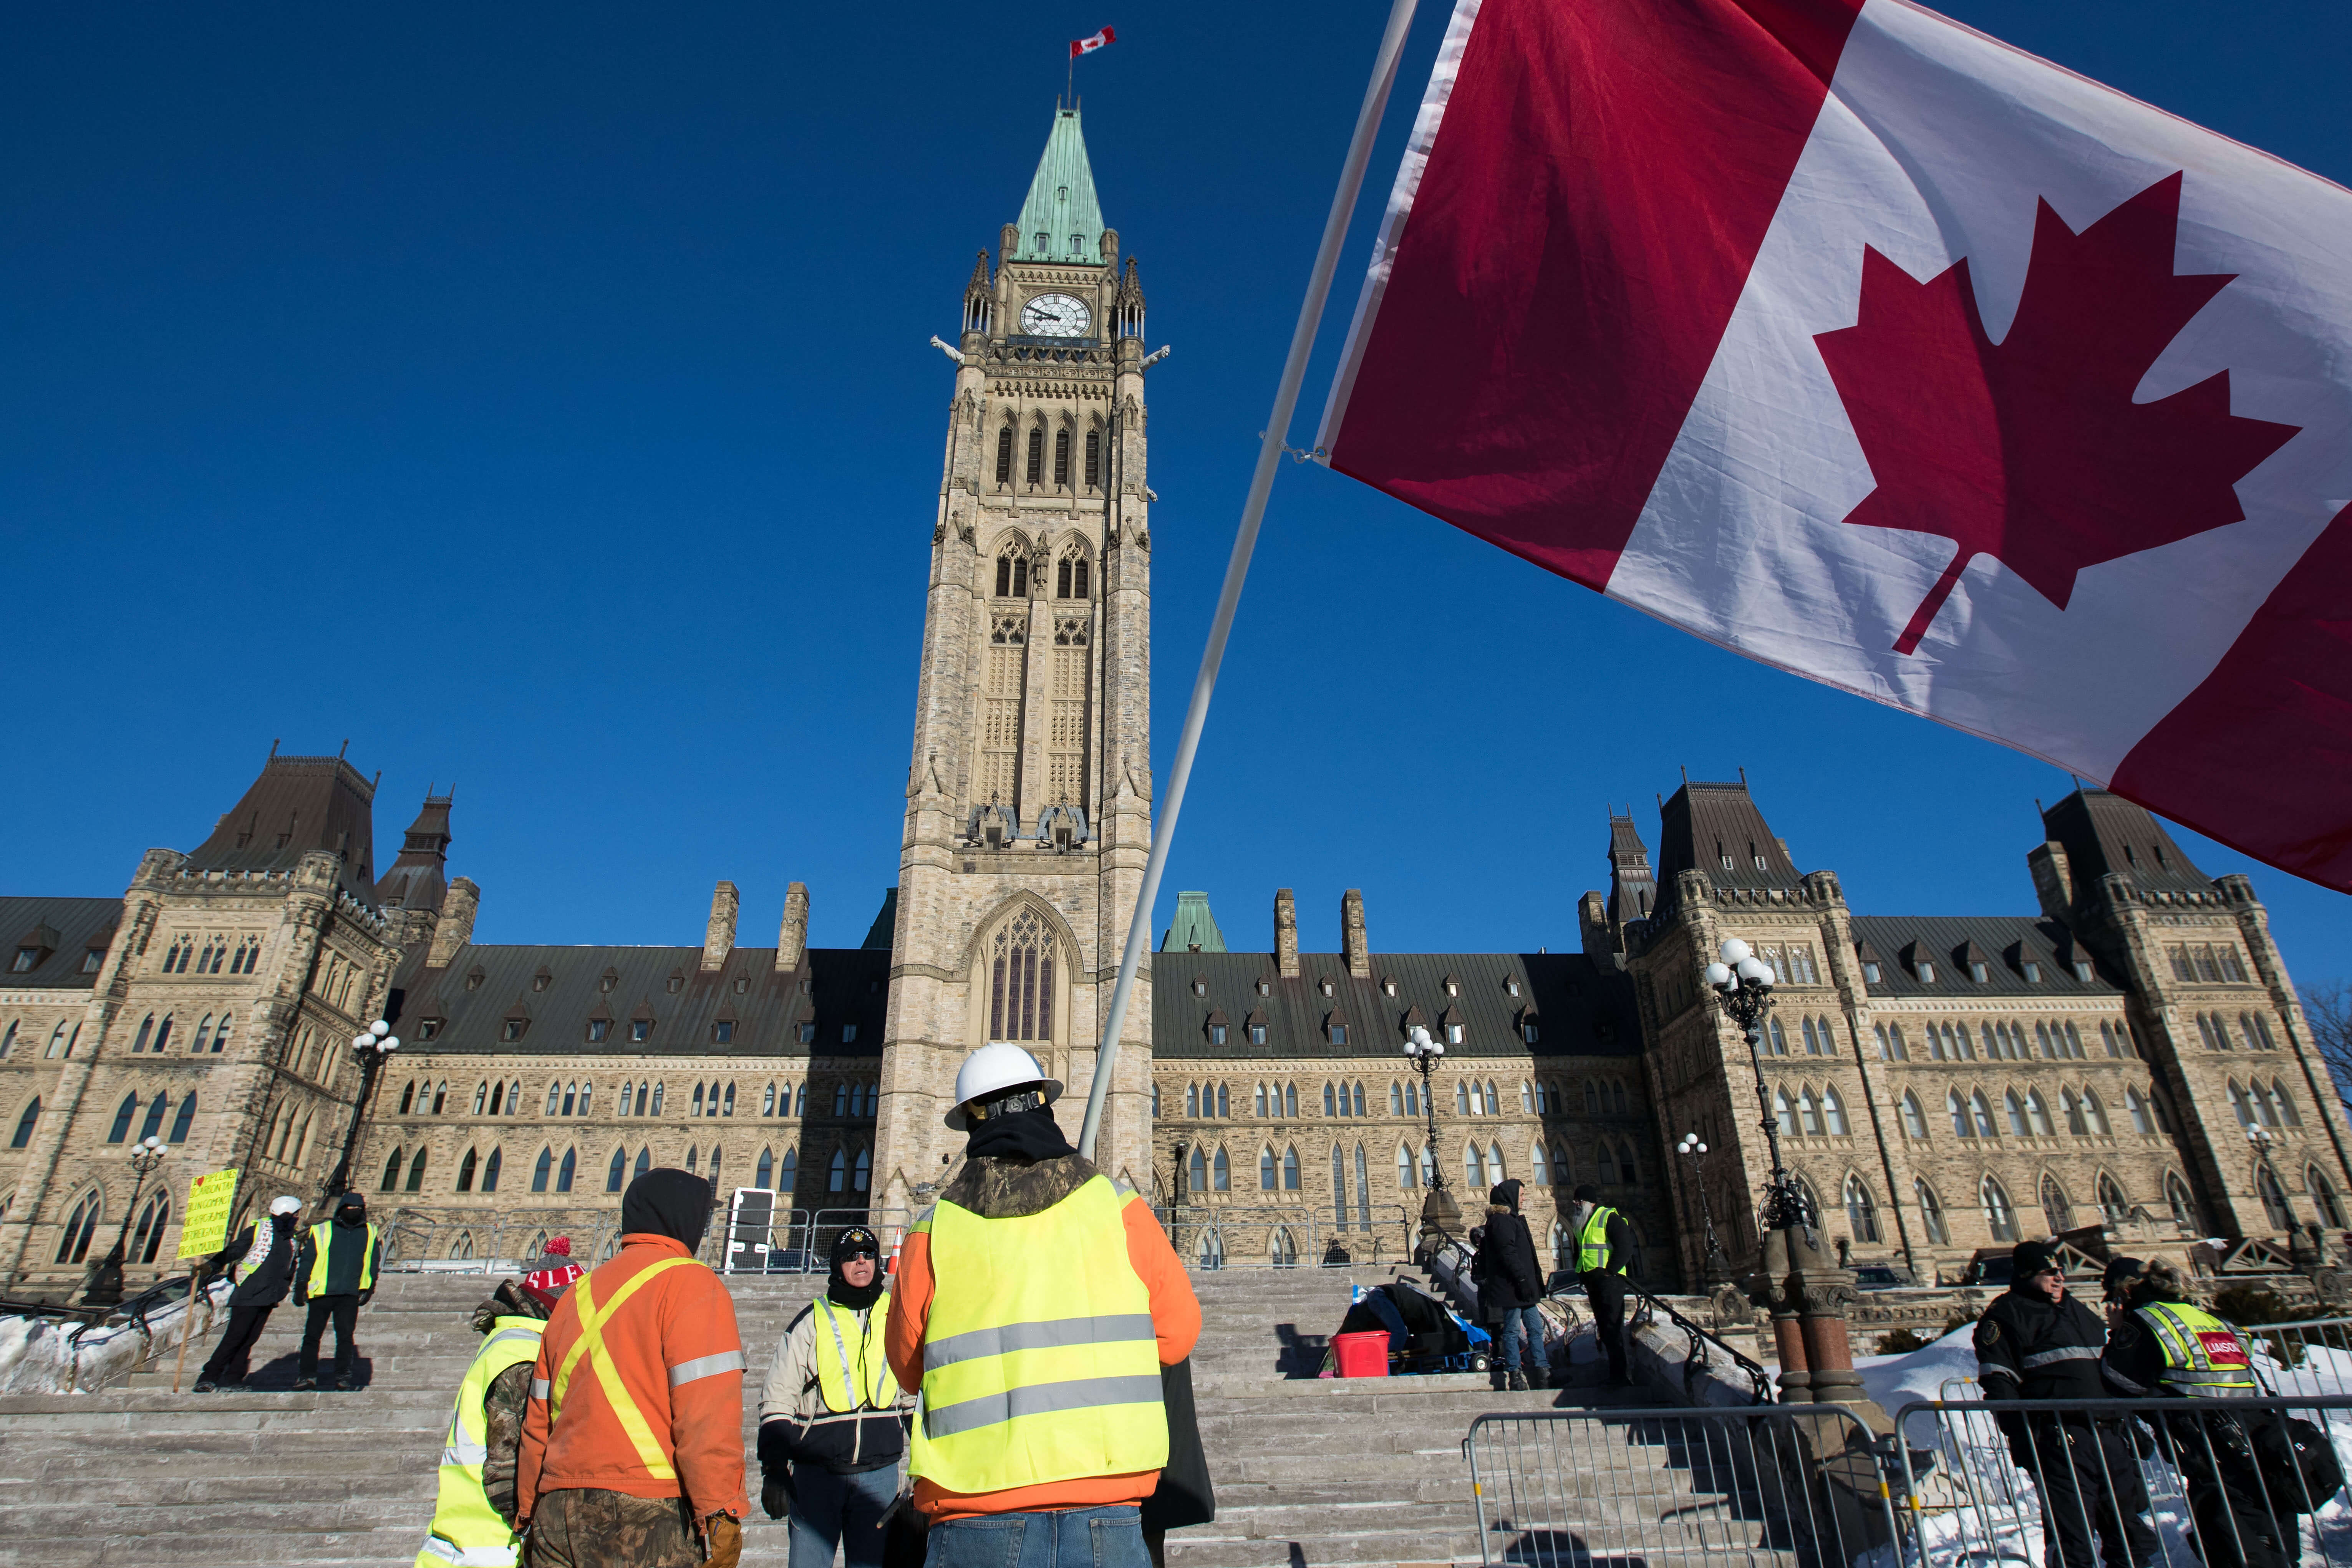 Canadian study permit rules: Two men are waving the Canadian flag in front of the parliament building in Ottawa